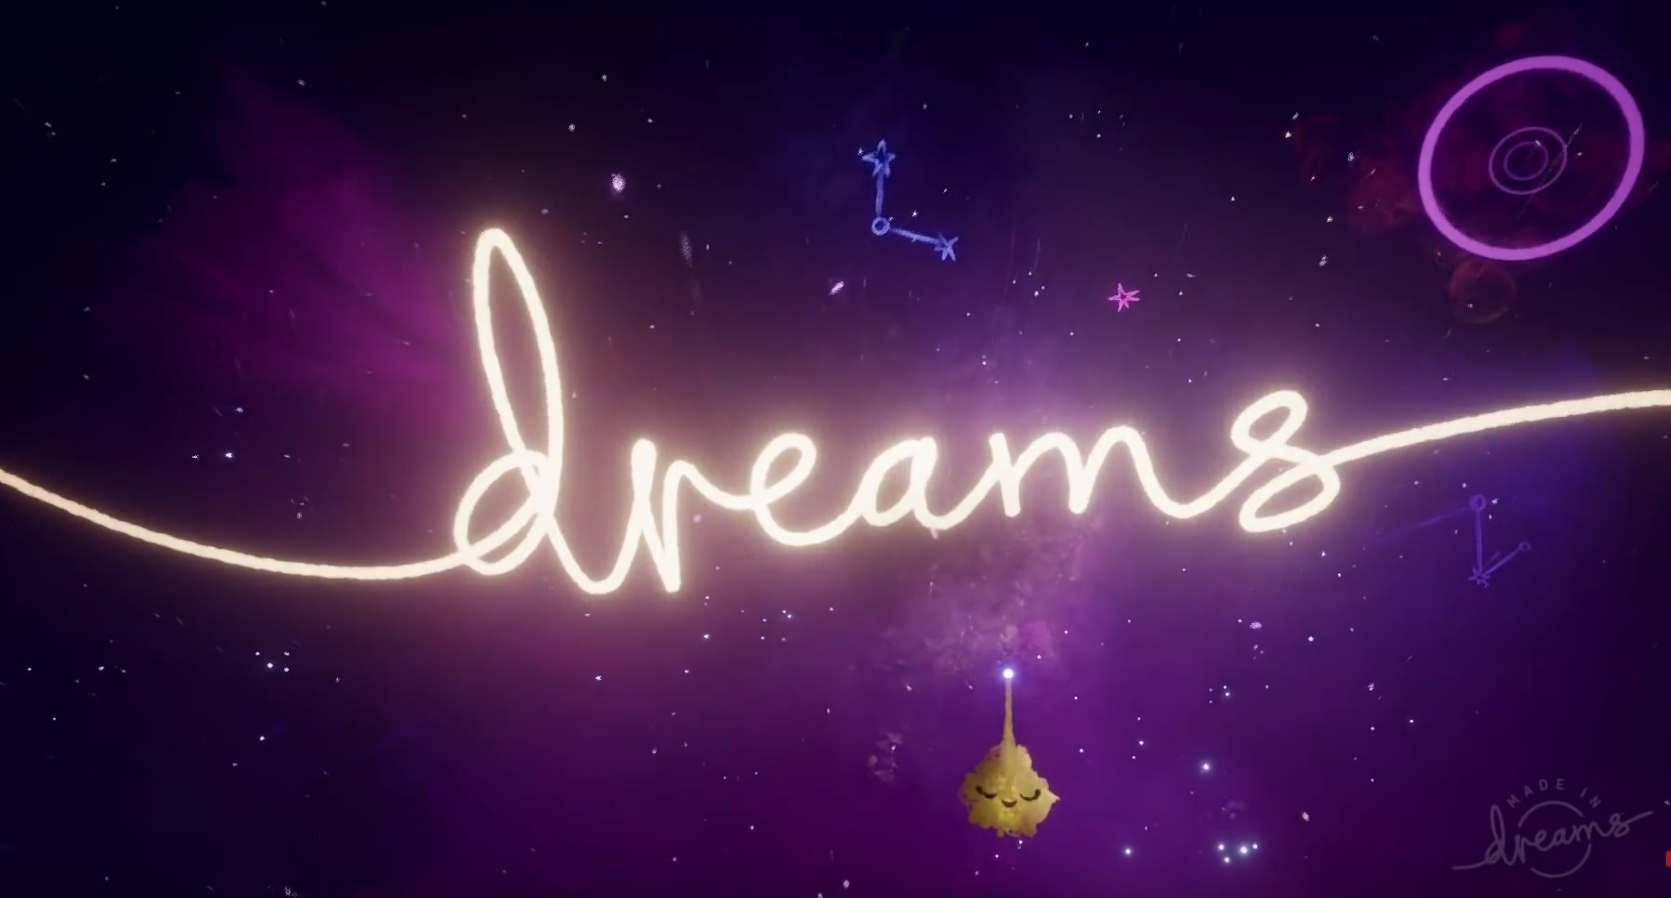 Sony Reportedly Working To Remove All Nintendo Content From Dreams At Nintendo’s Request